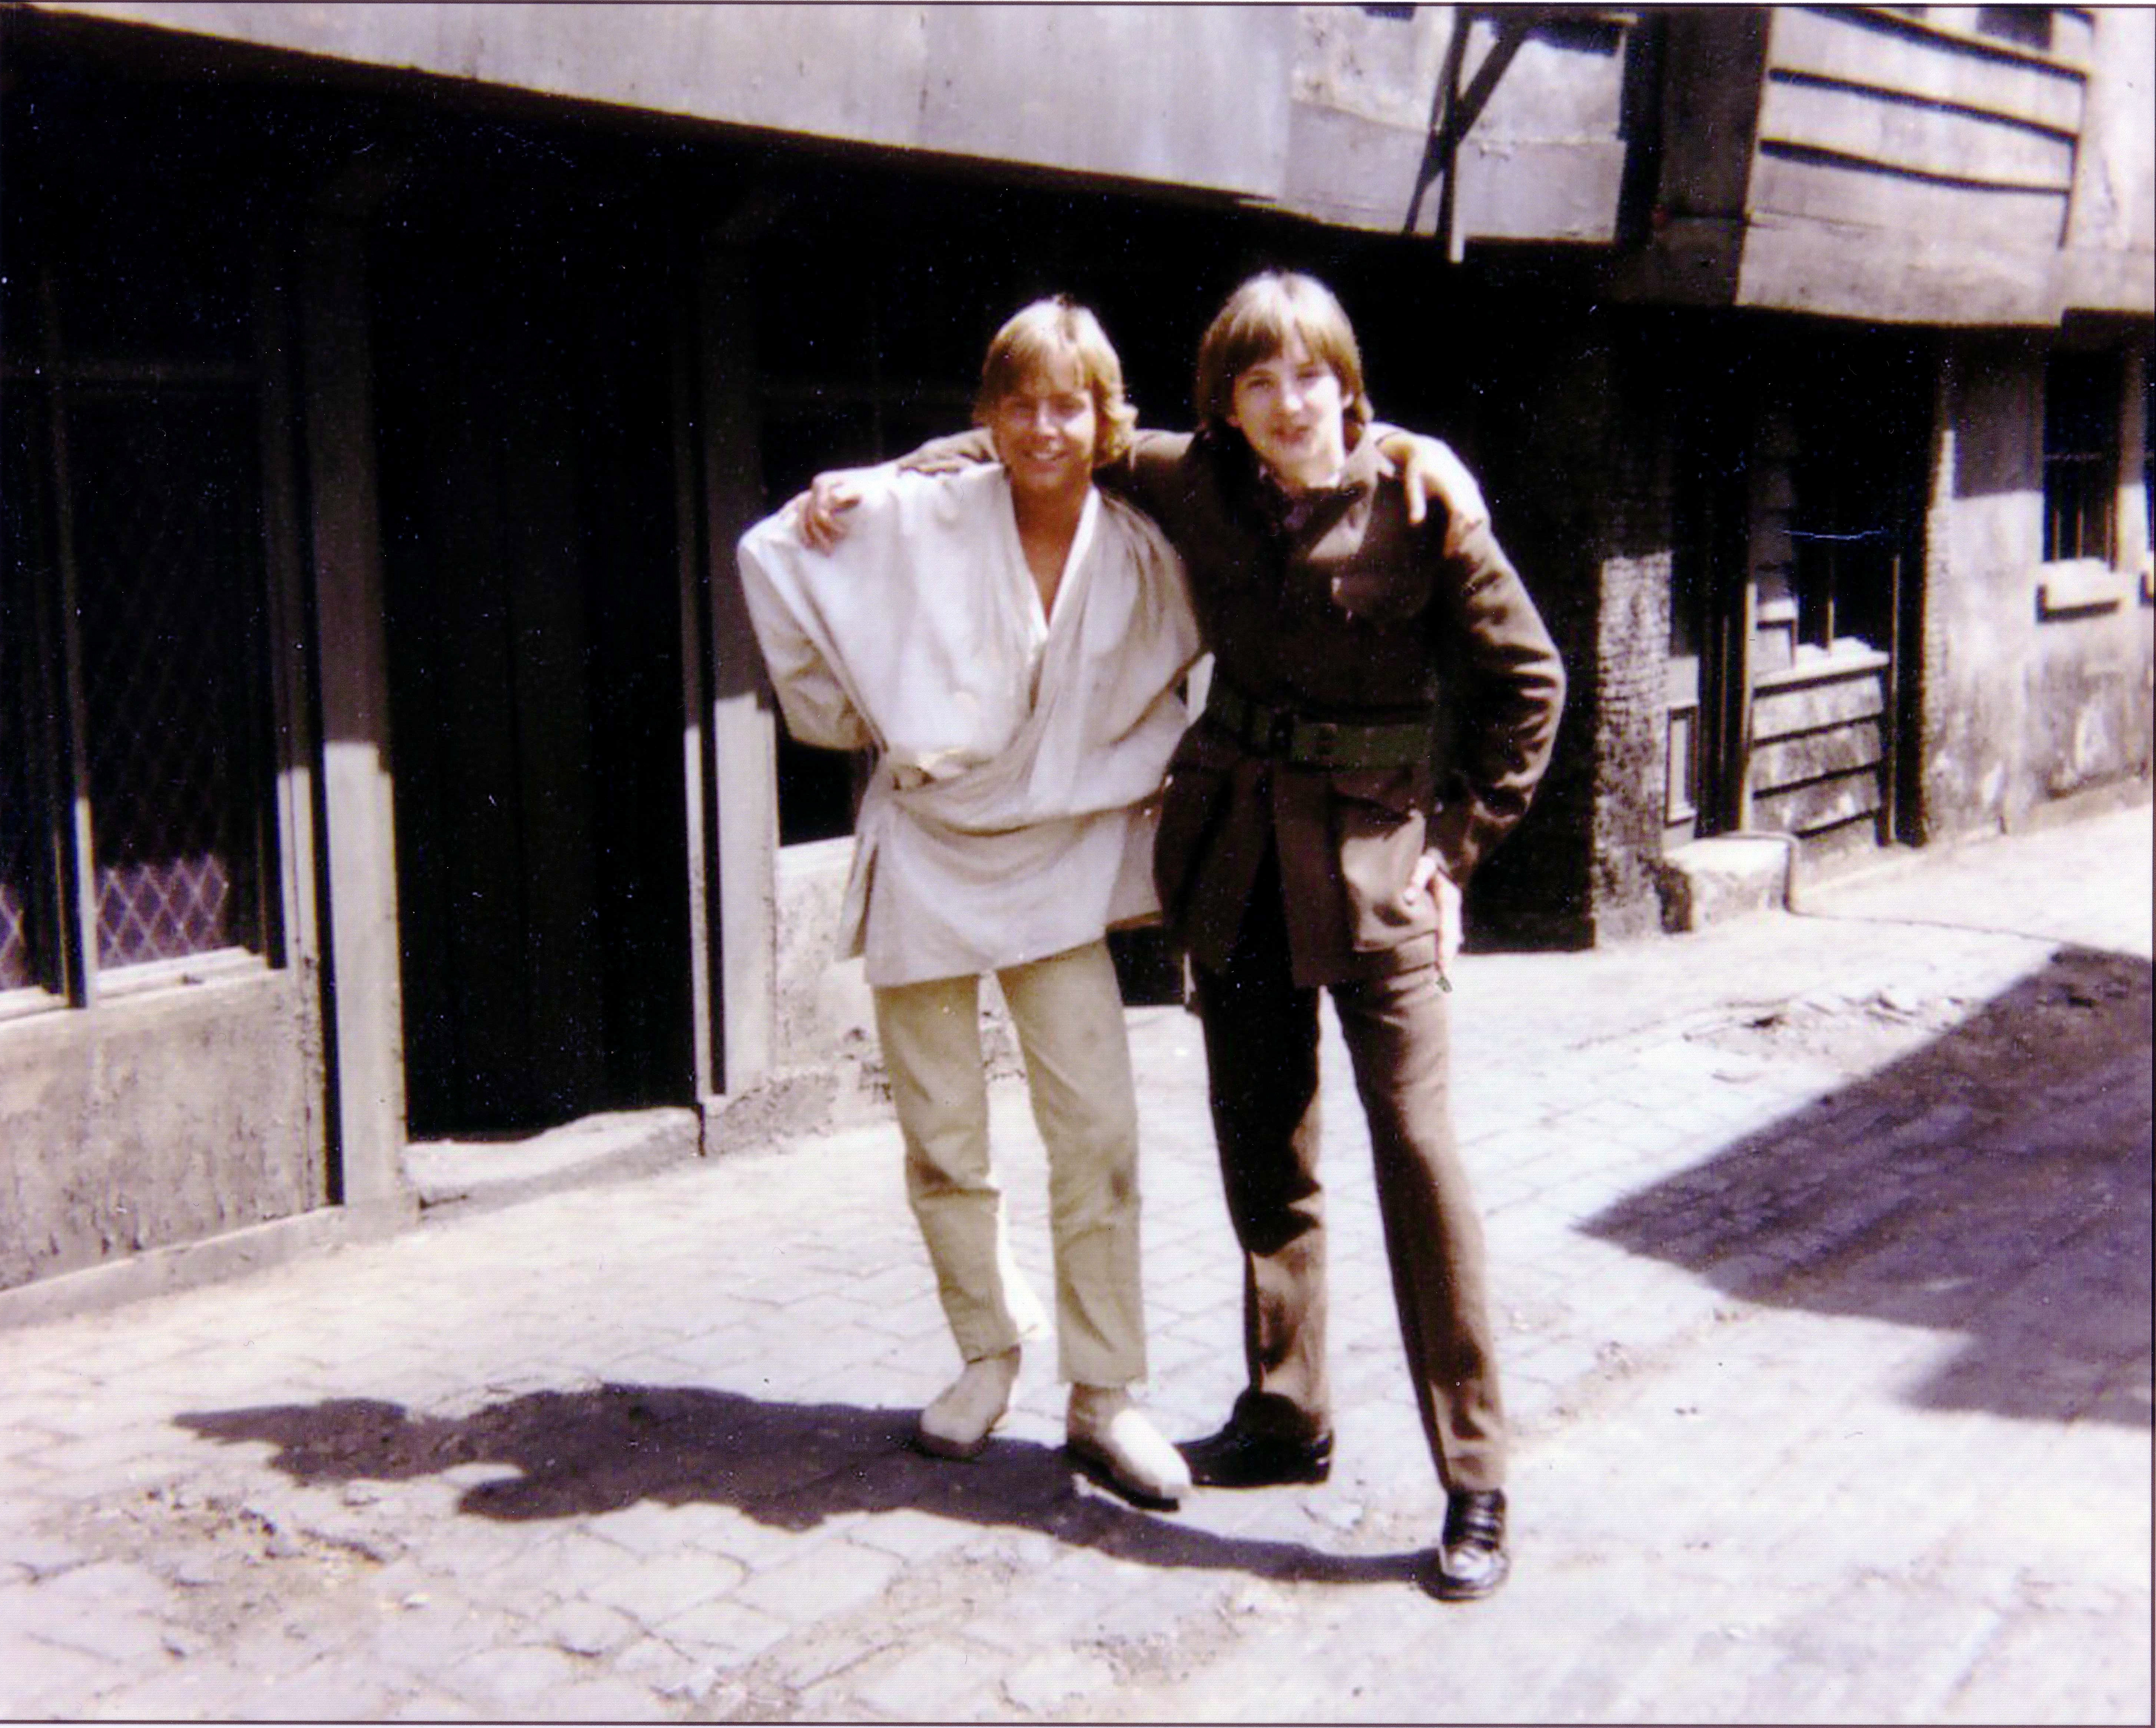 STAR WARS A NEW HOPE Me with Mark Hamill. We took this on the old film Musical set of 'Oliver' at Shepperton Studios.